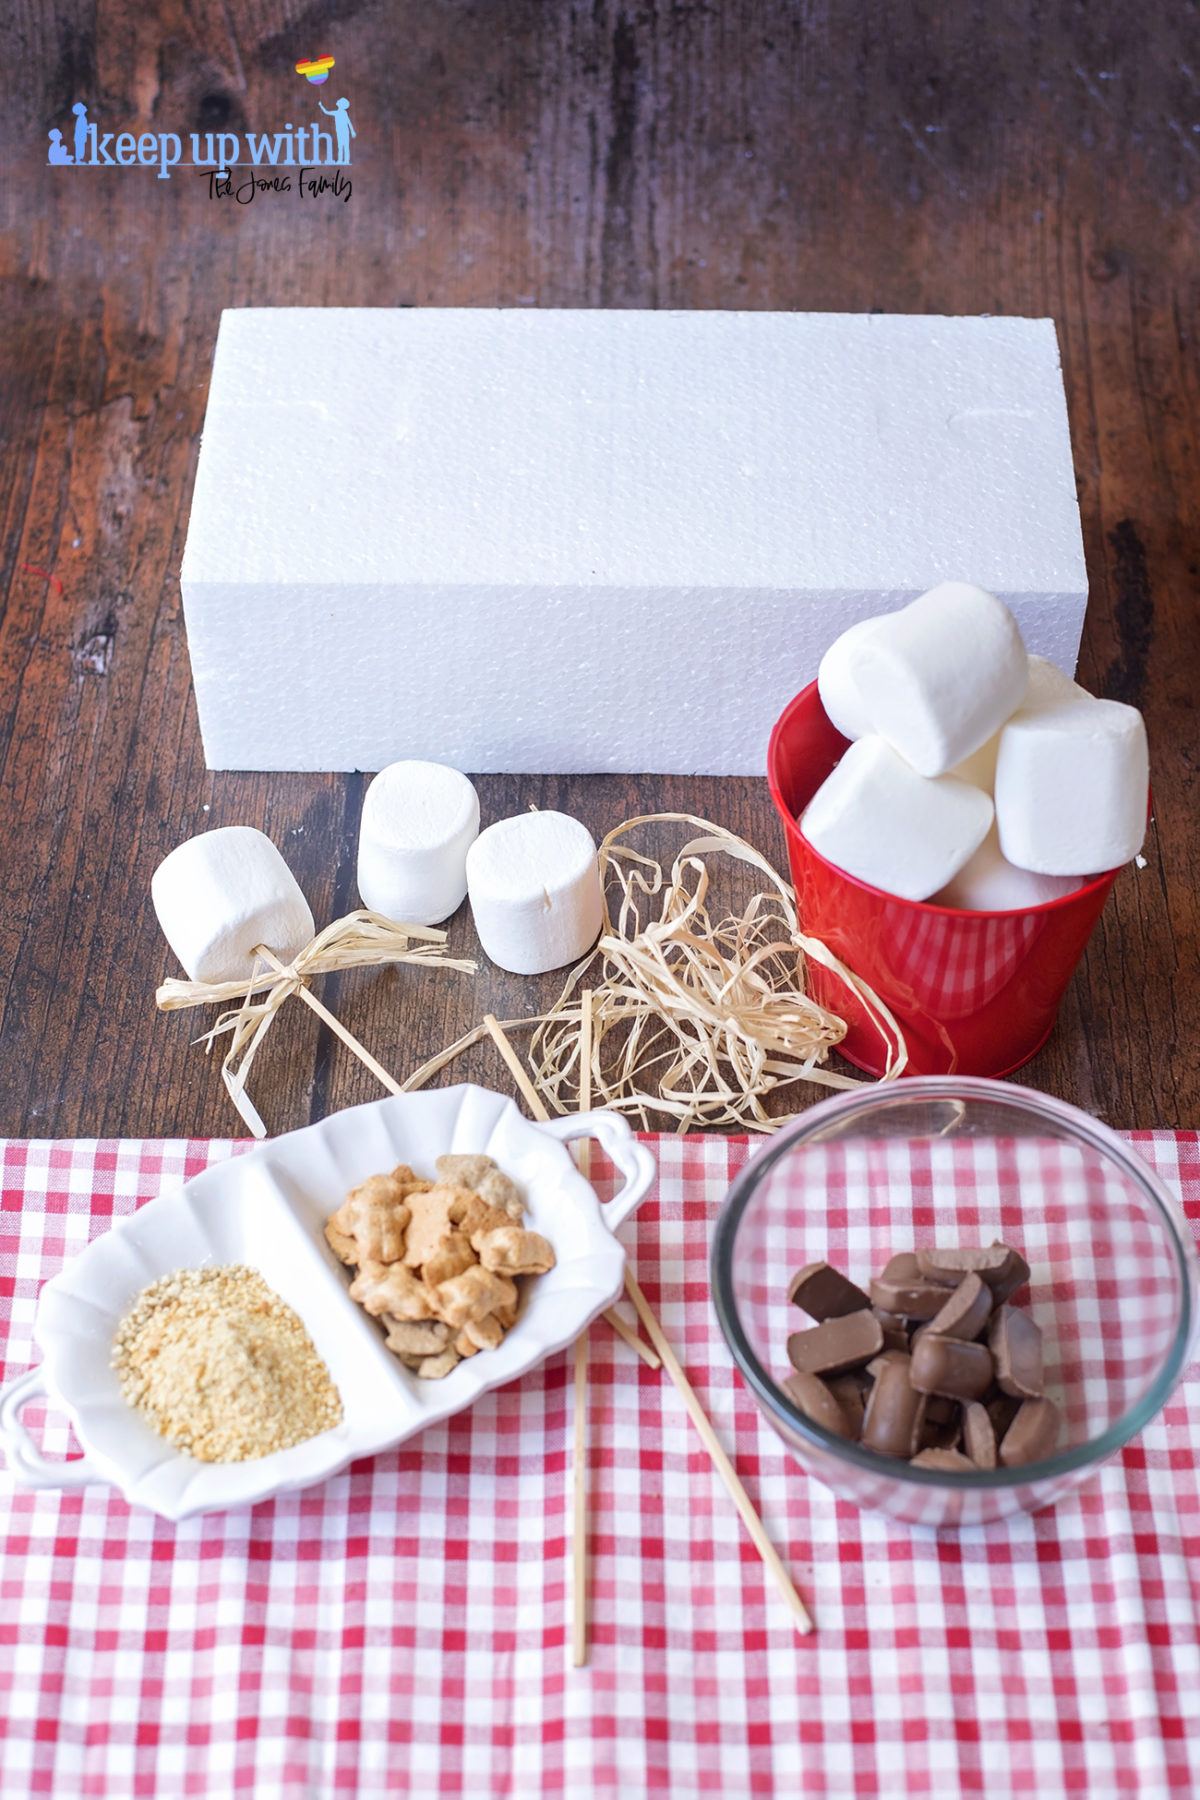 Image shows the ingredients for teddy bear s'more pops on a dark wooden tabletop. There are wooden sticks with raffia bows, marge marshmallows in a red bucket and on a checked red and white tablecloth there is a white scalloped dish containing cinnamon teddy grahams and crushed digestive biscuits. In the glass bowl there is dairy milk chocolate. Image by Keep Up With the Jones Family.